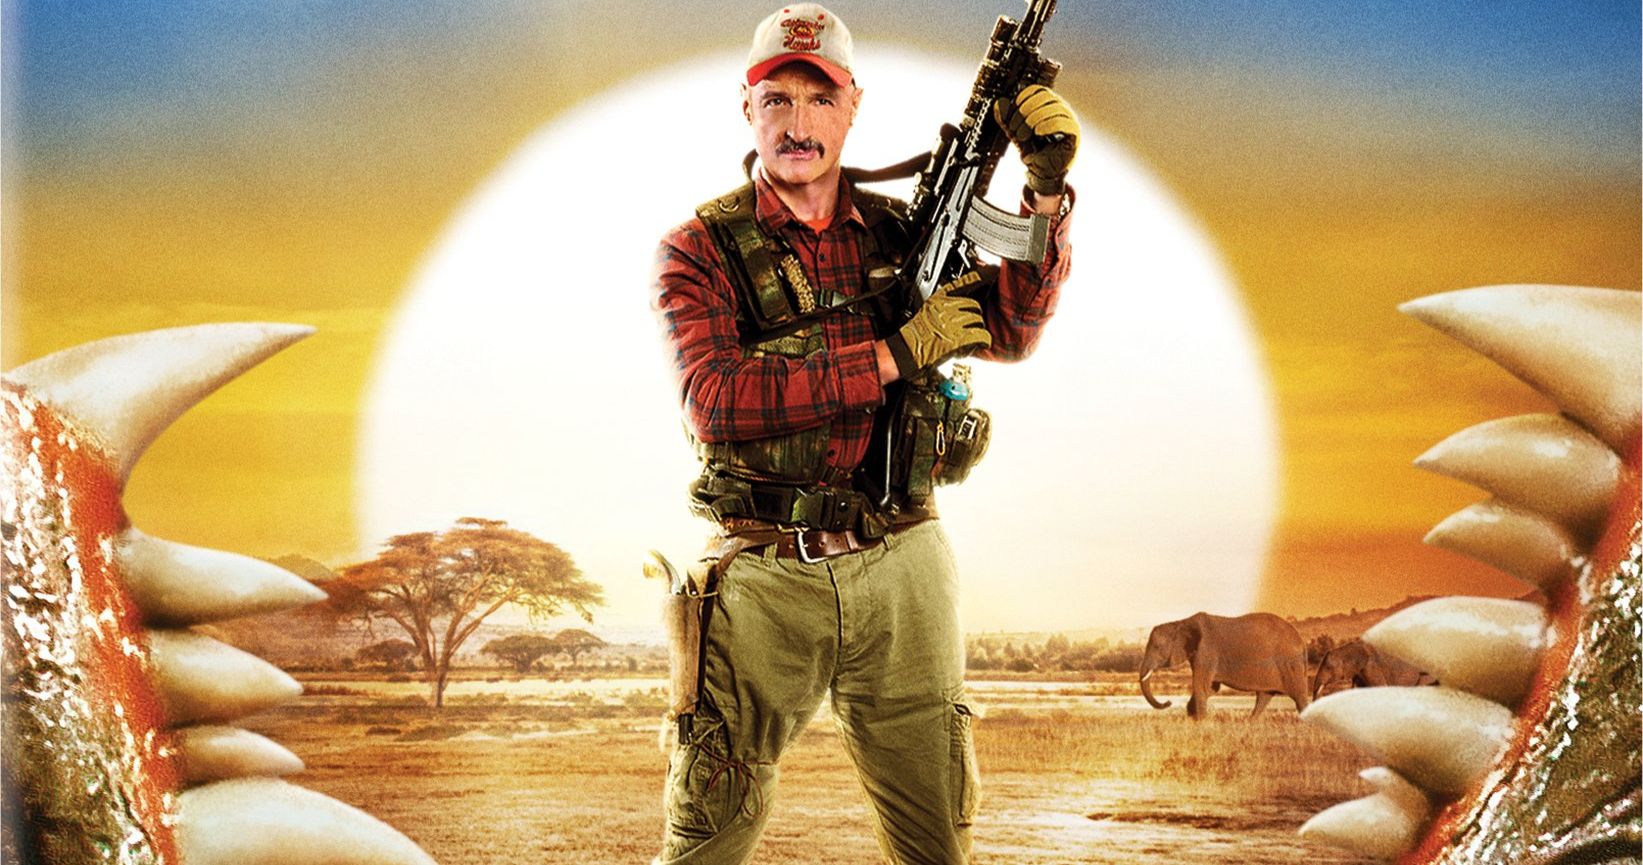 Tremors 7 Films in Thailand Next Month with Franchise Star Michael Gross